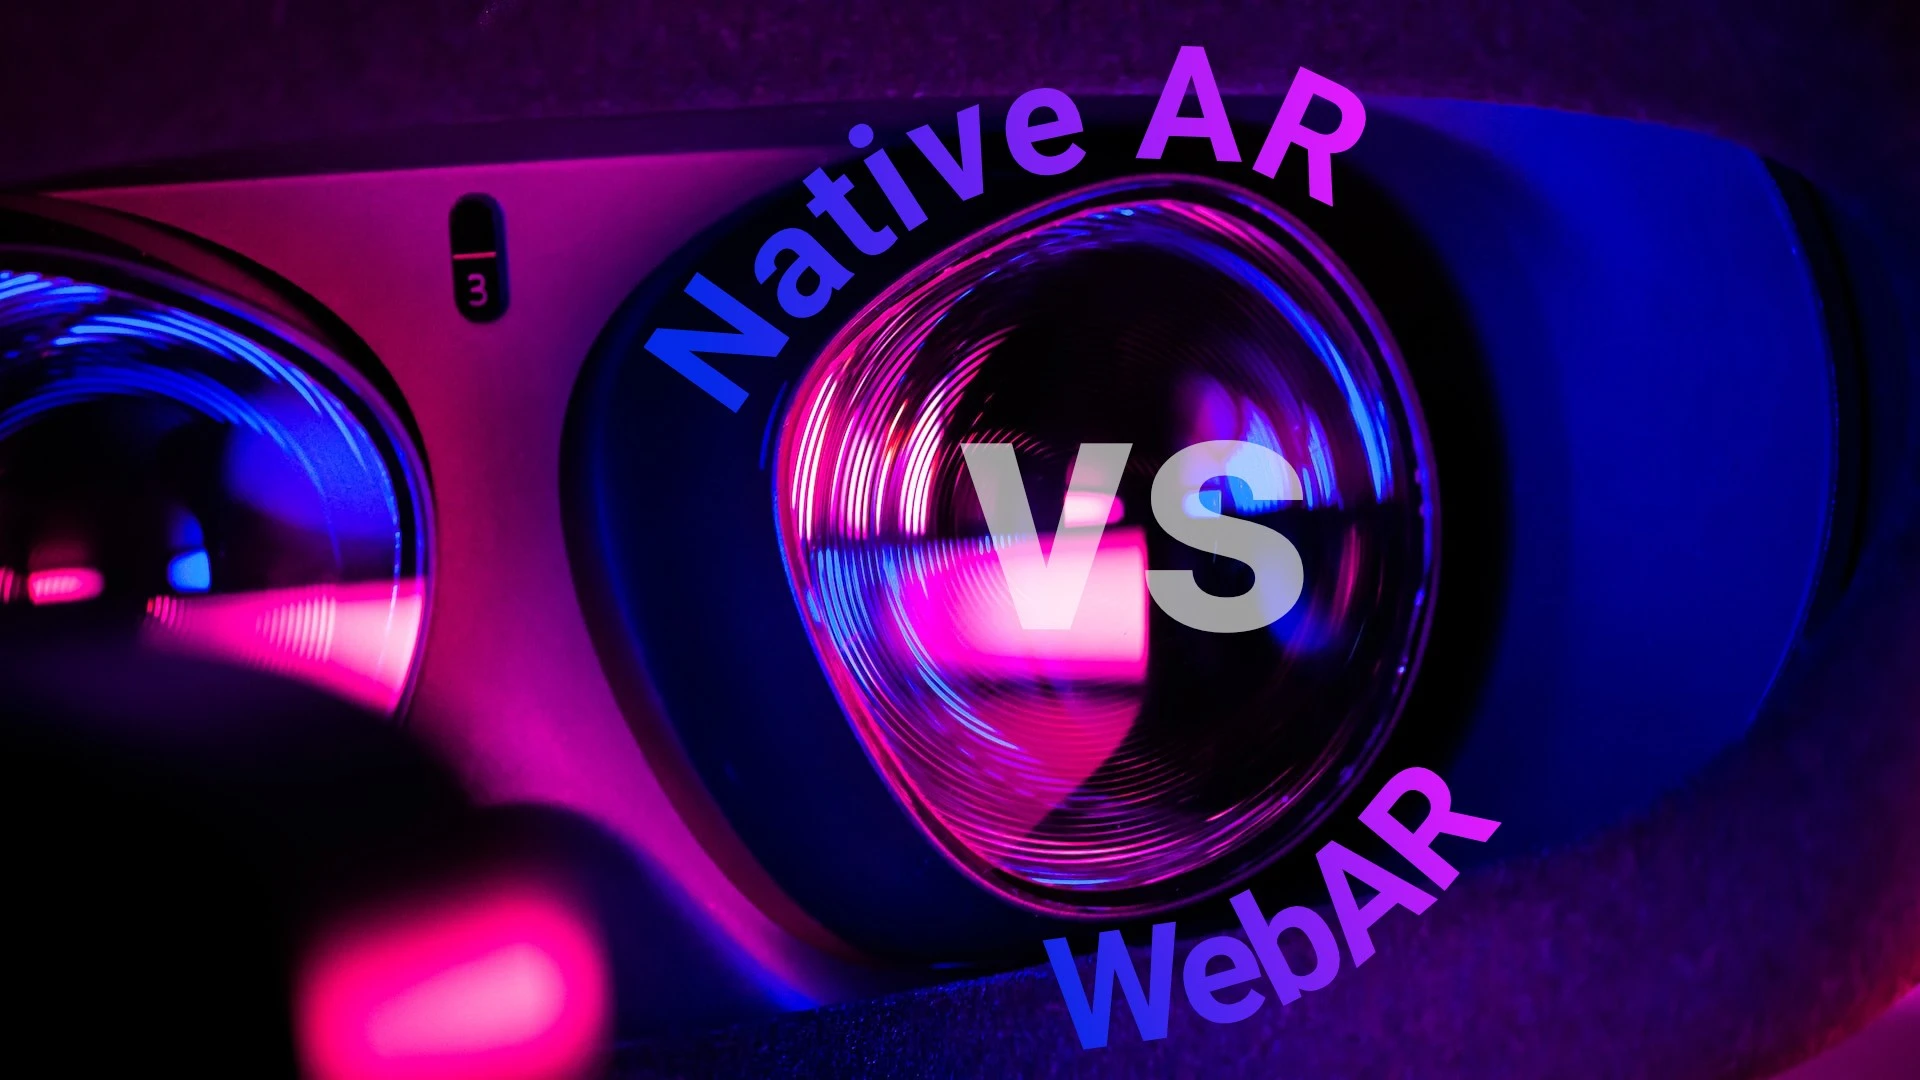 closeup of a VR headset with text Native AR vs WebAR